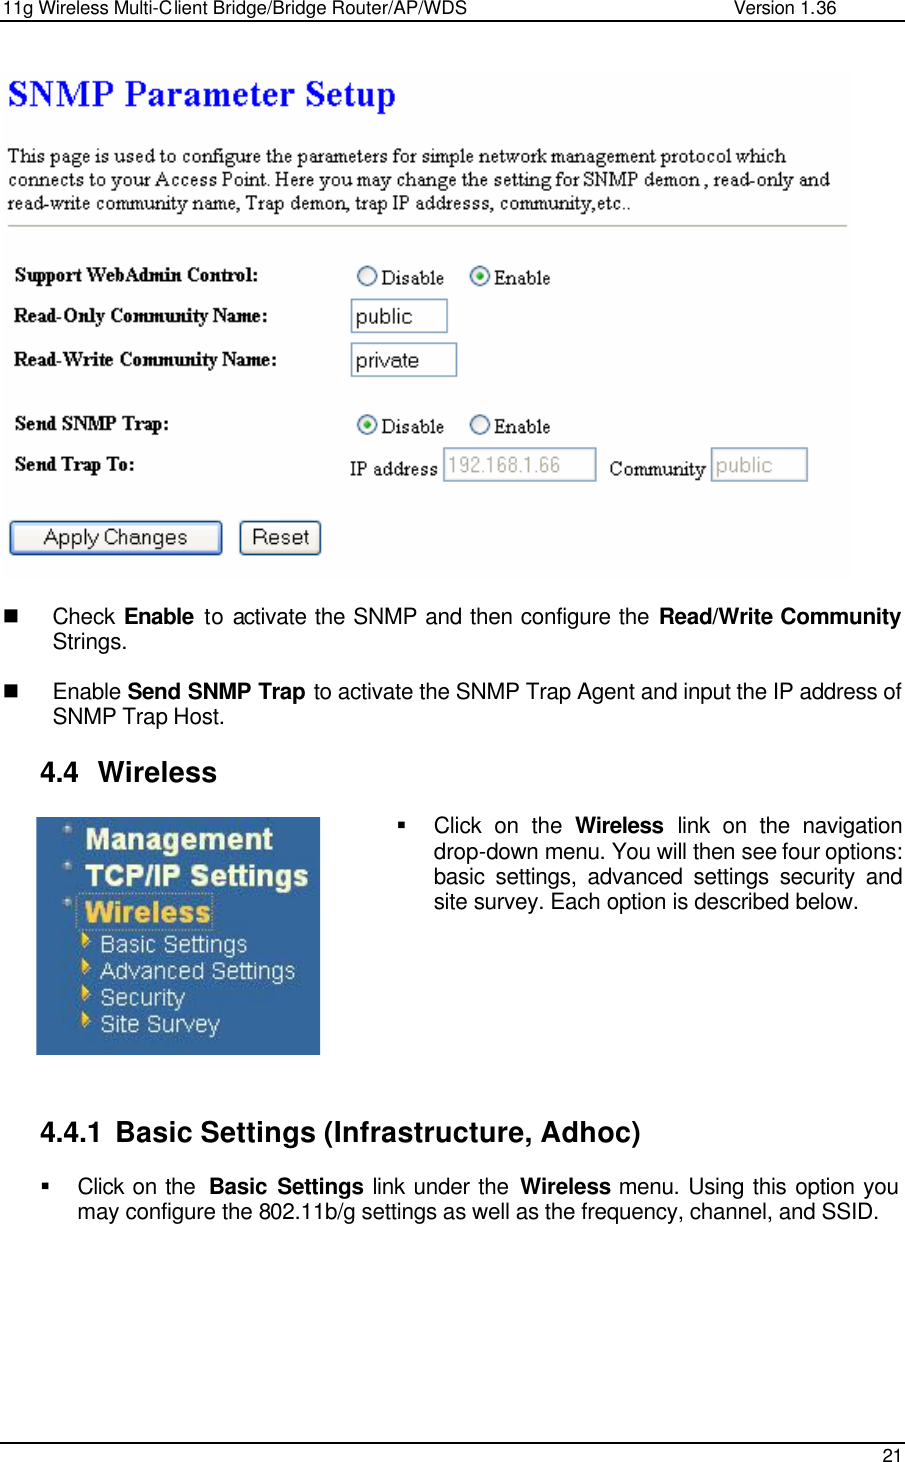 11g Wireless Multi-Client Bridge/Bridge Router/AP/WDS                                                   Version 1.36    21     n Check  Enable to activate the SNMP and then configure the Read/Write Community Strings.  n Enable Send SNMP Trap to activate the SNMP Trap Agent and input the IP address of SNMP Trap Host.  4.4 Wireless § Click on the Wireless link on the navigation drop-down menu. You will then see four options: basic settings, advanced settings security and site survey. Each option is described below.          4.4.1 Basic Settings (Infrastructure, Adhoc) § Click on the  Basic Settings link under the Wireless menu. Using this option you may configure the 802.11b/g settings as well as the frequency, channel, and SSID.    